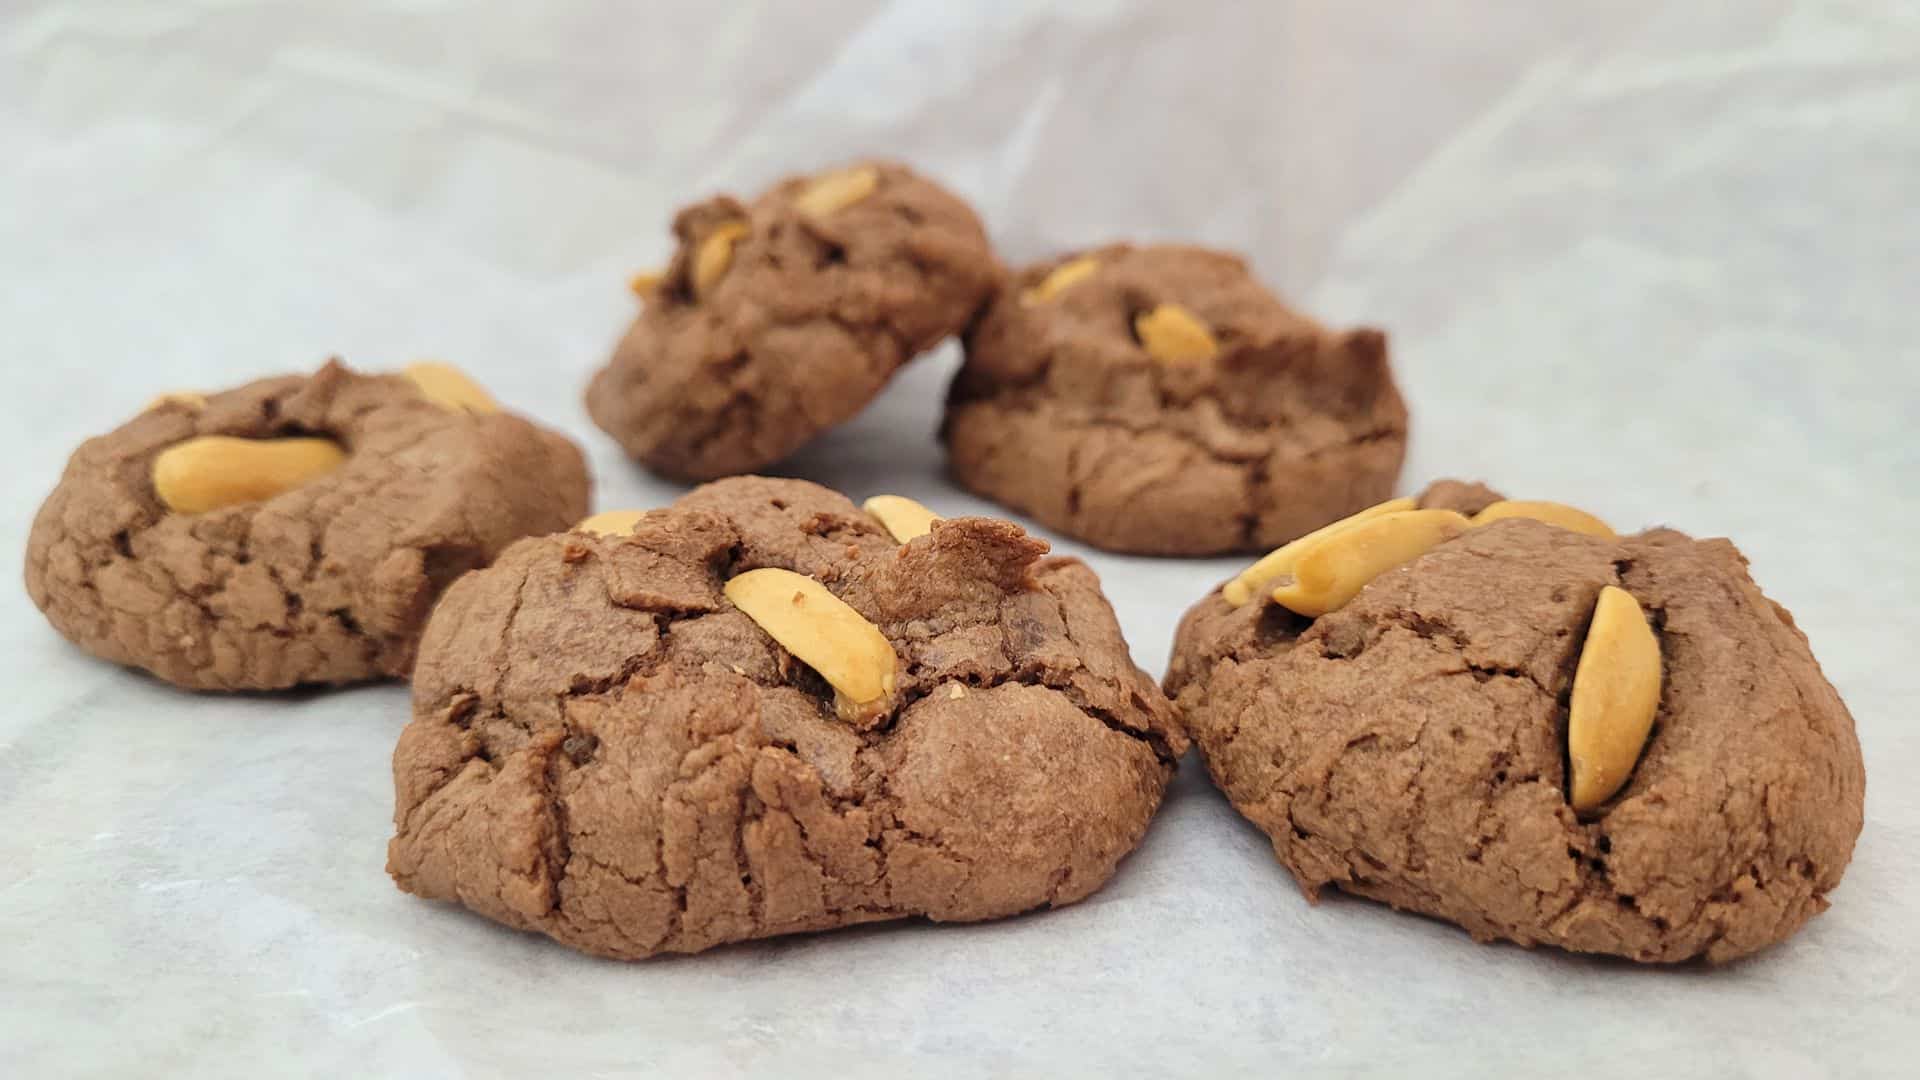 gluten free chocolate sour cream cookie variation with roasted peanuts added